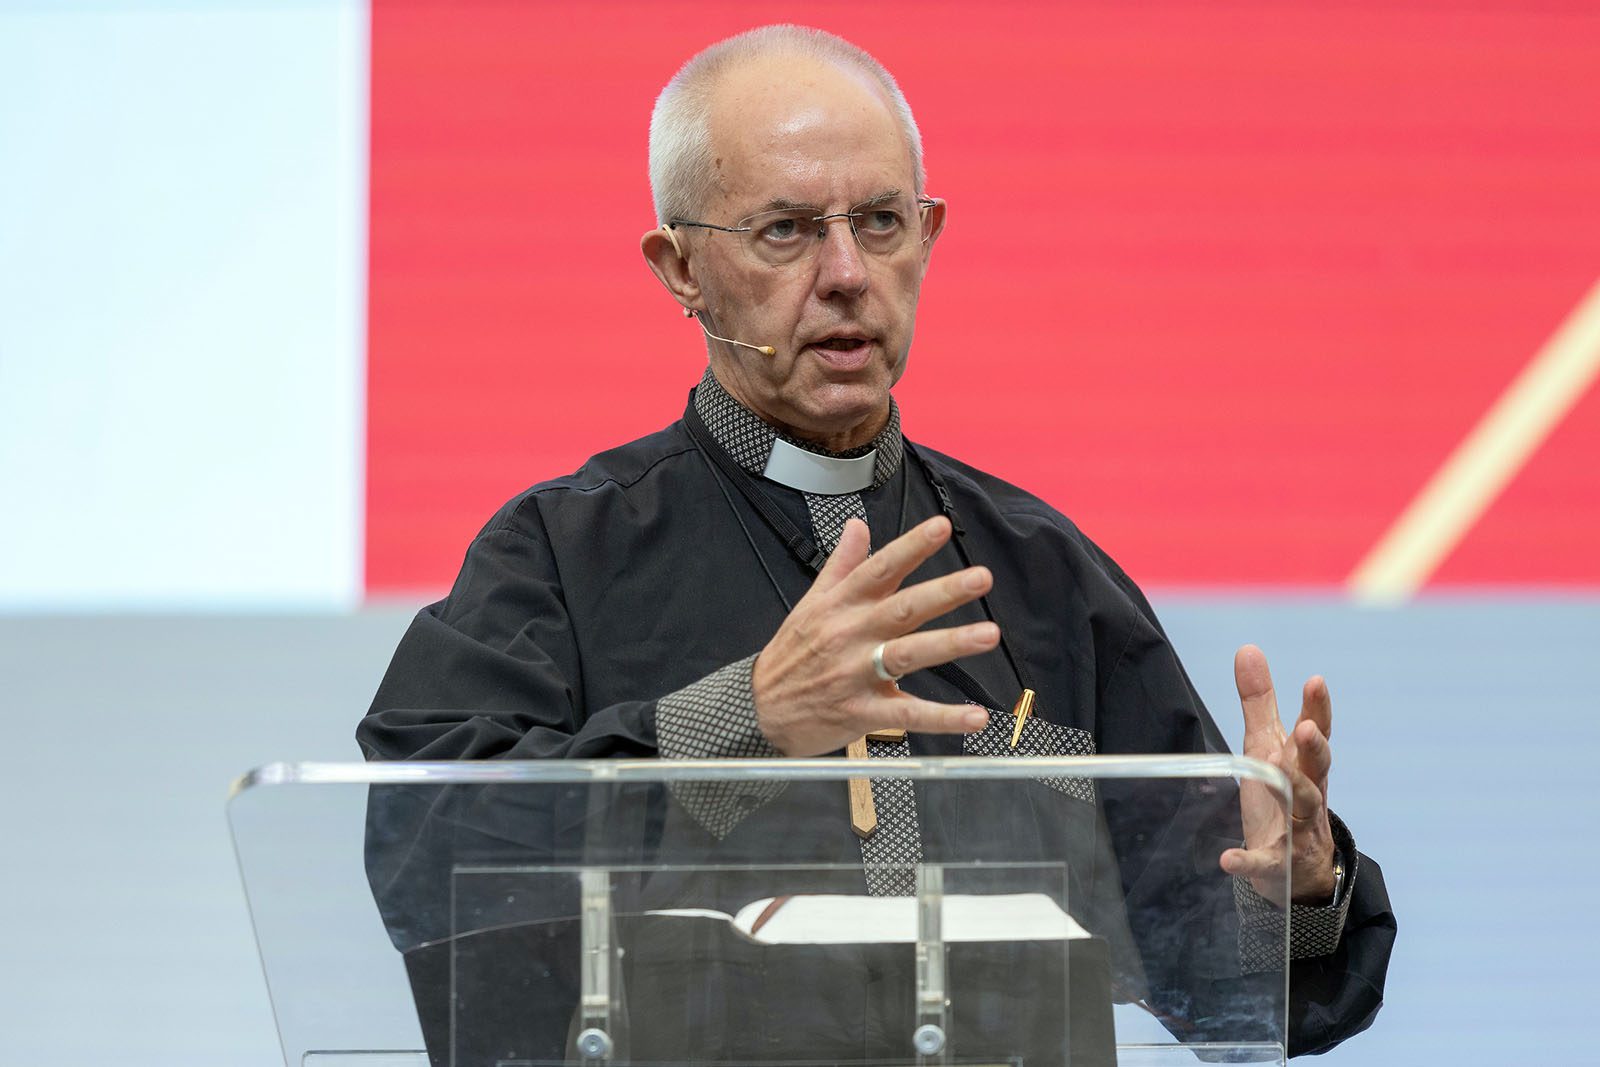 Justin Welby, Archbishop of Canterbury, addresses the Bible Exposition “ A Holy People following Christ” in Venue 1 at The University of Kent during the 2022 Lambeth Conference, Monday, Aug. 1, 2022. Photo by Neil Turner for The Lambeth Conference